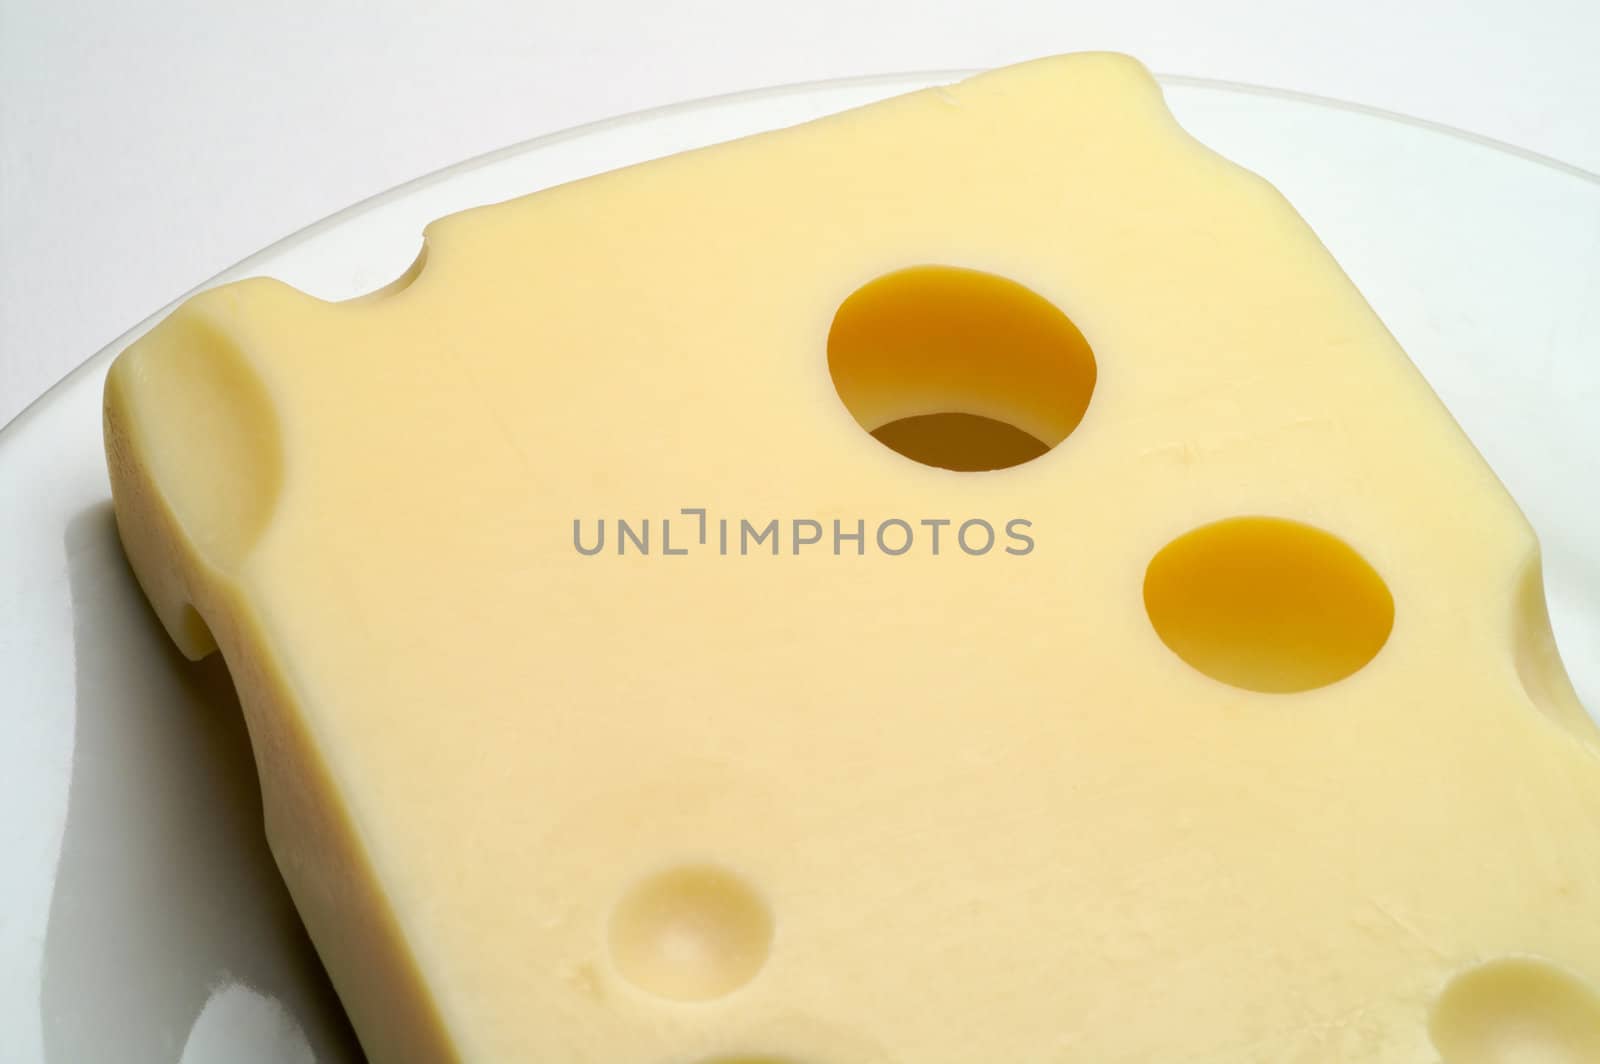 Cheese: Emmental by Laborer